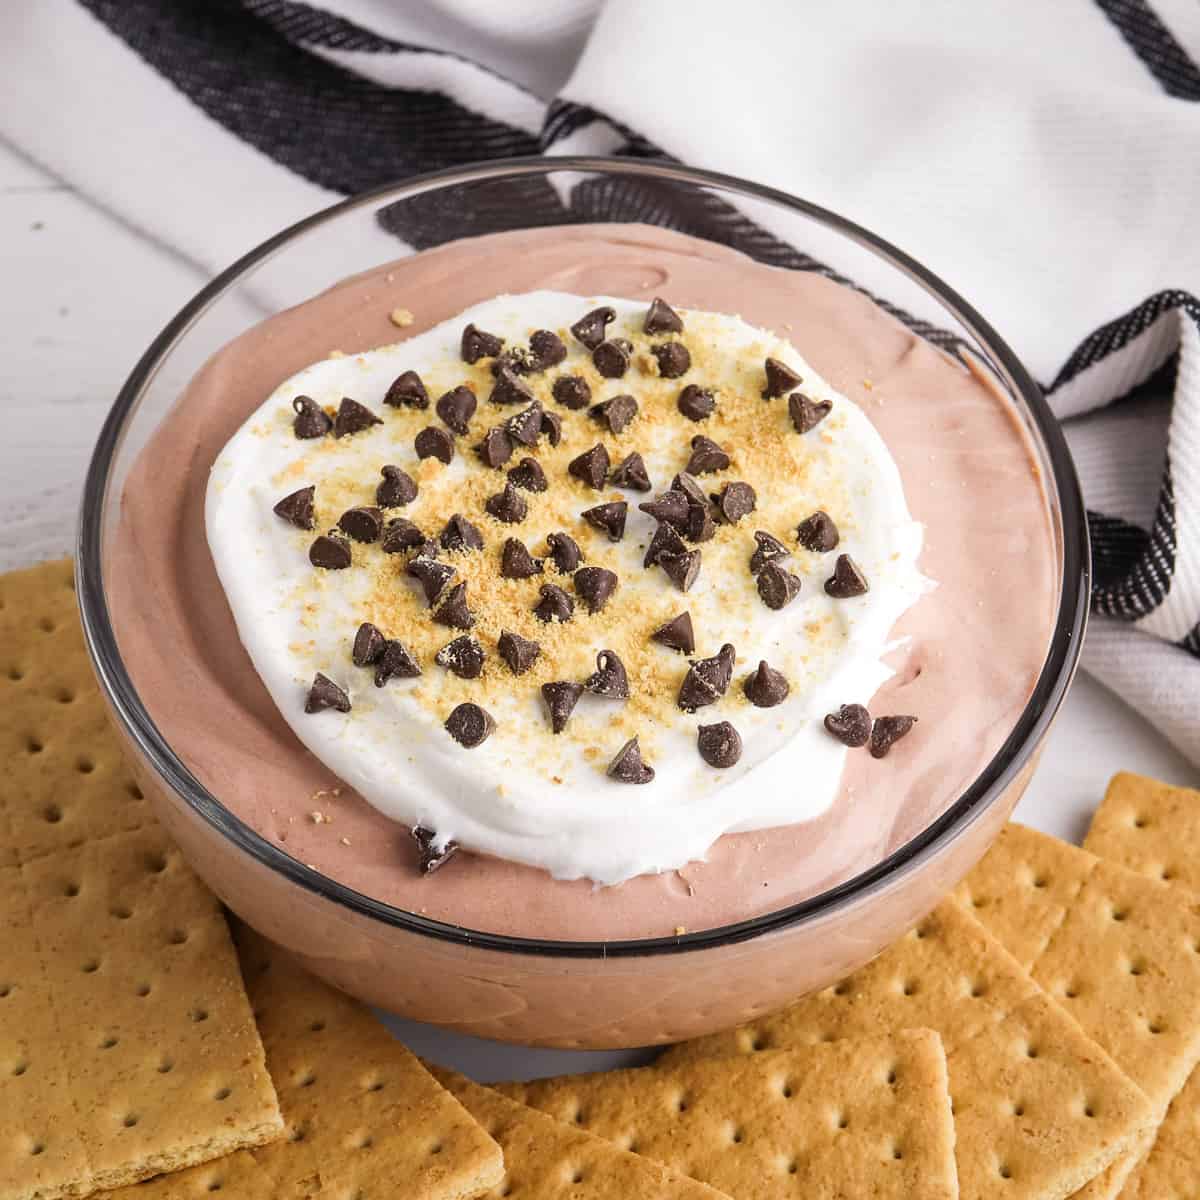 Chocolate pudding and cool whip dip with mini chocolate chips and graham crackers.